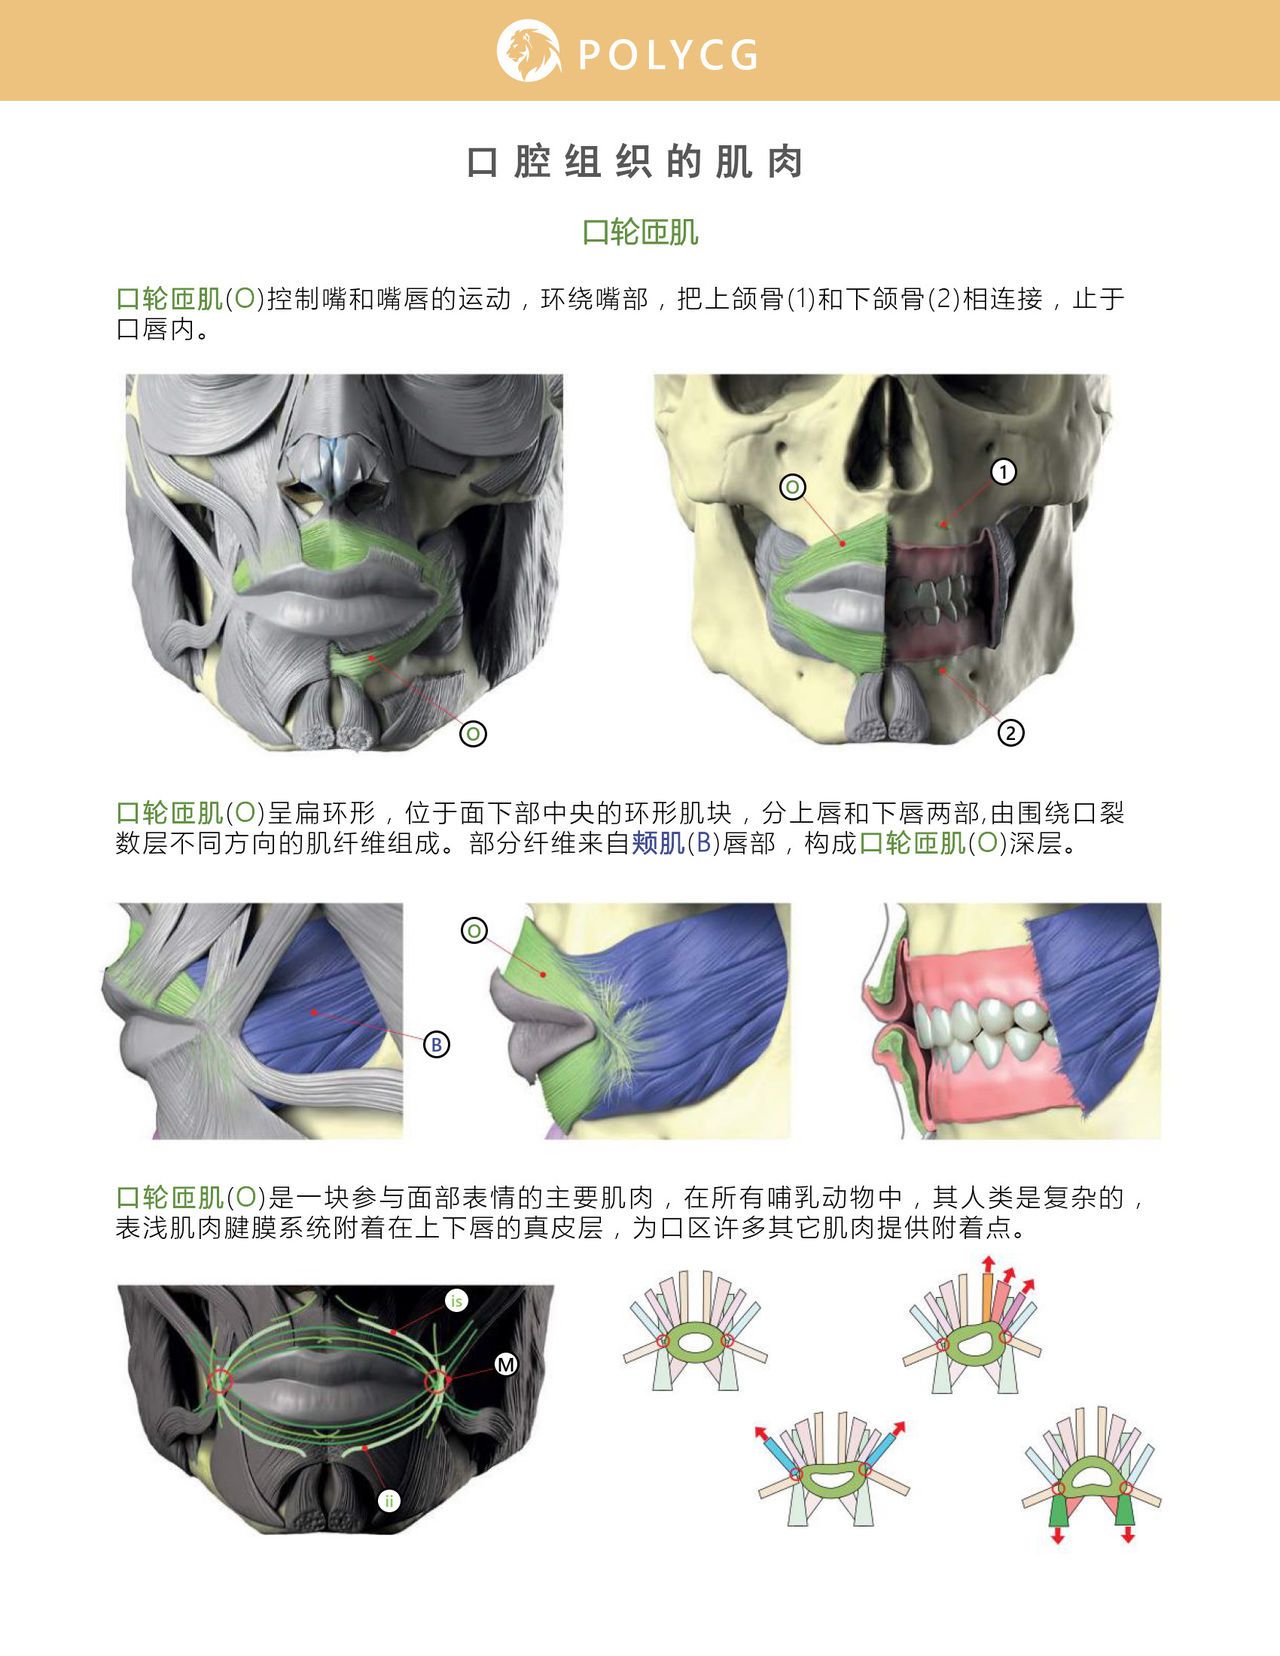 Uldis Zarins-Anatomy of Facial Expression-Exonicus [Chinese] 面部表情艺用解剖 [中文版] 88